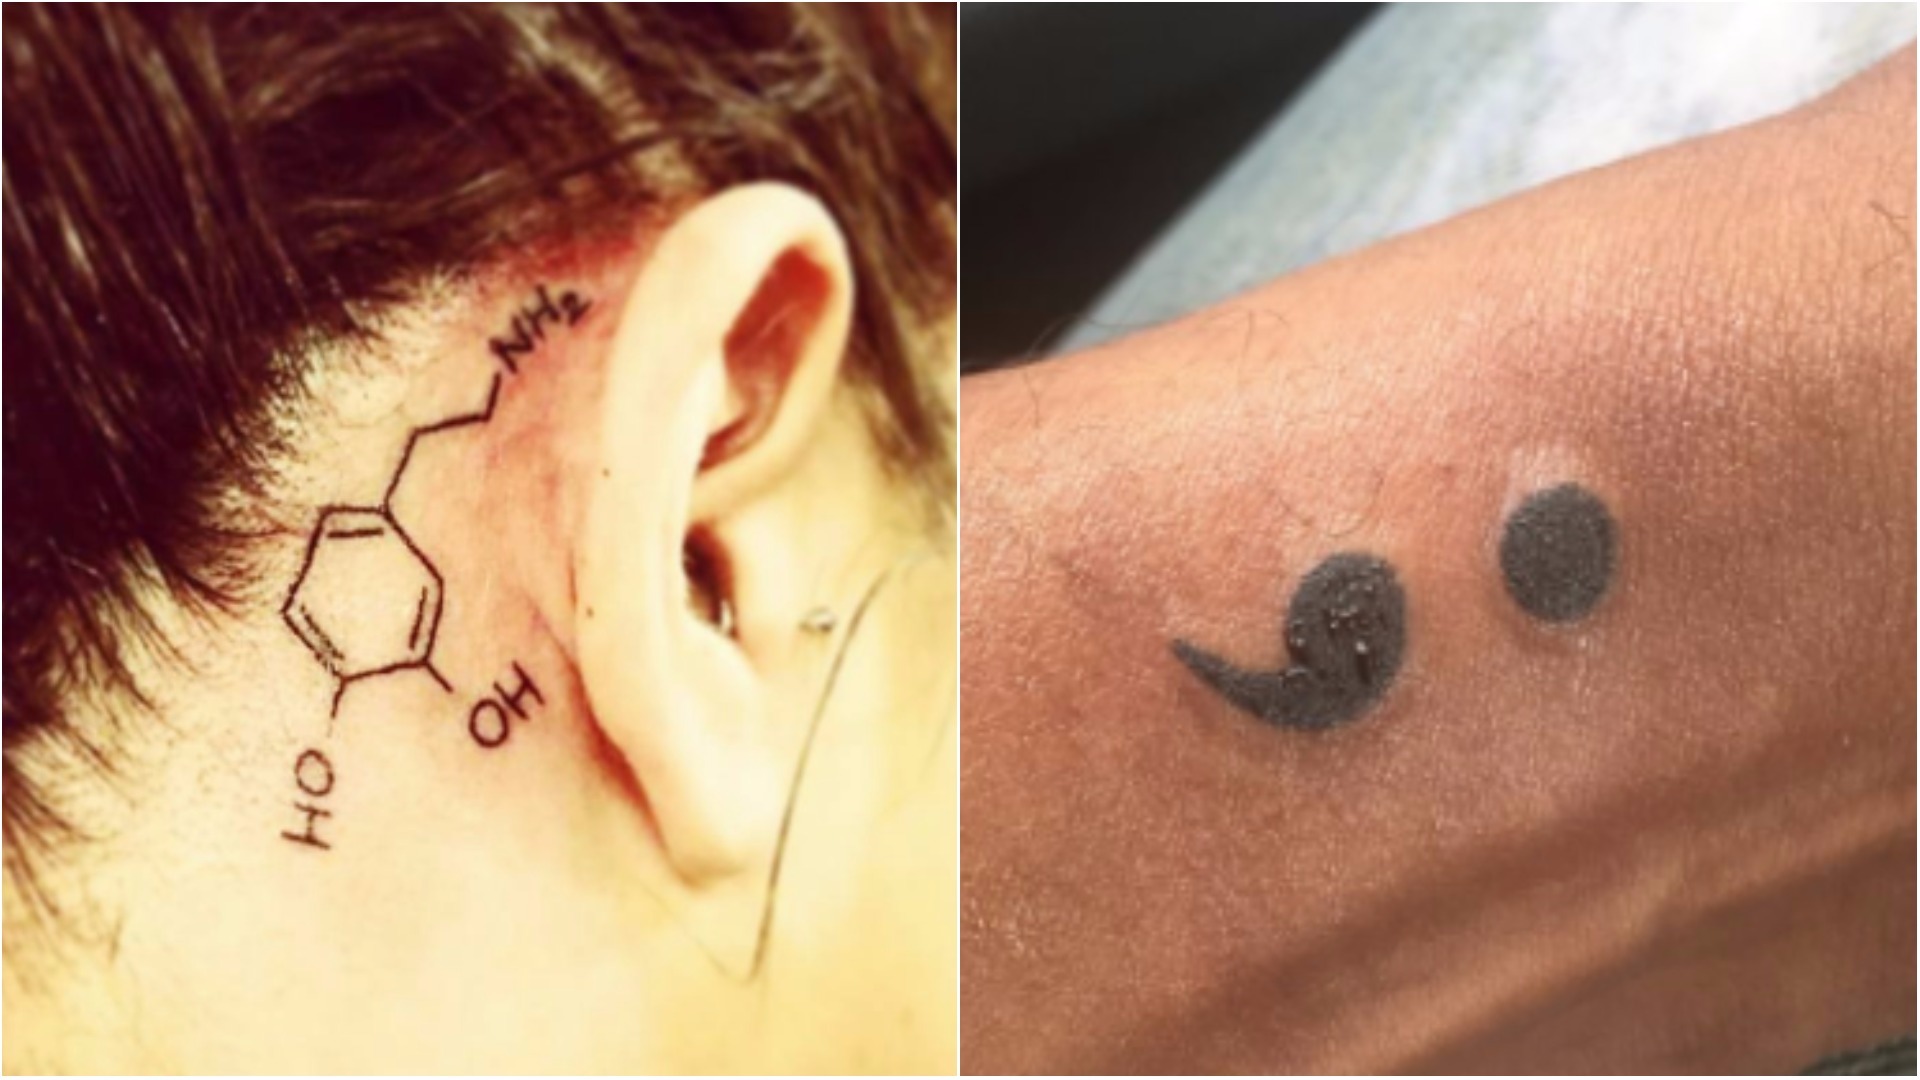 The meaning behind the semi colon and other mental health tattoos